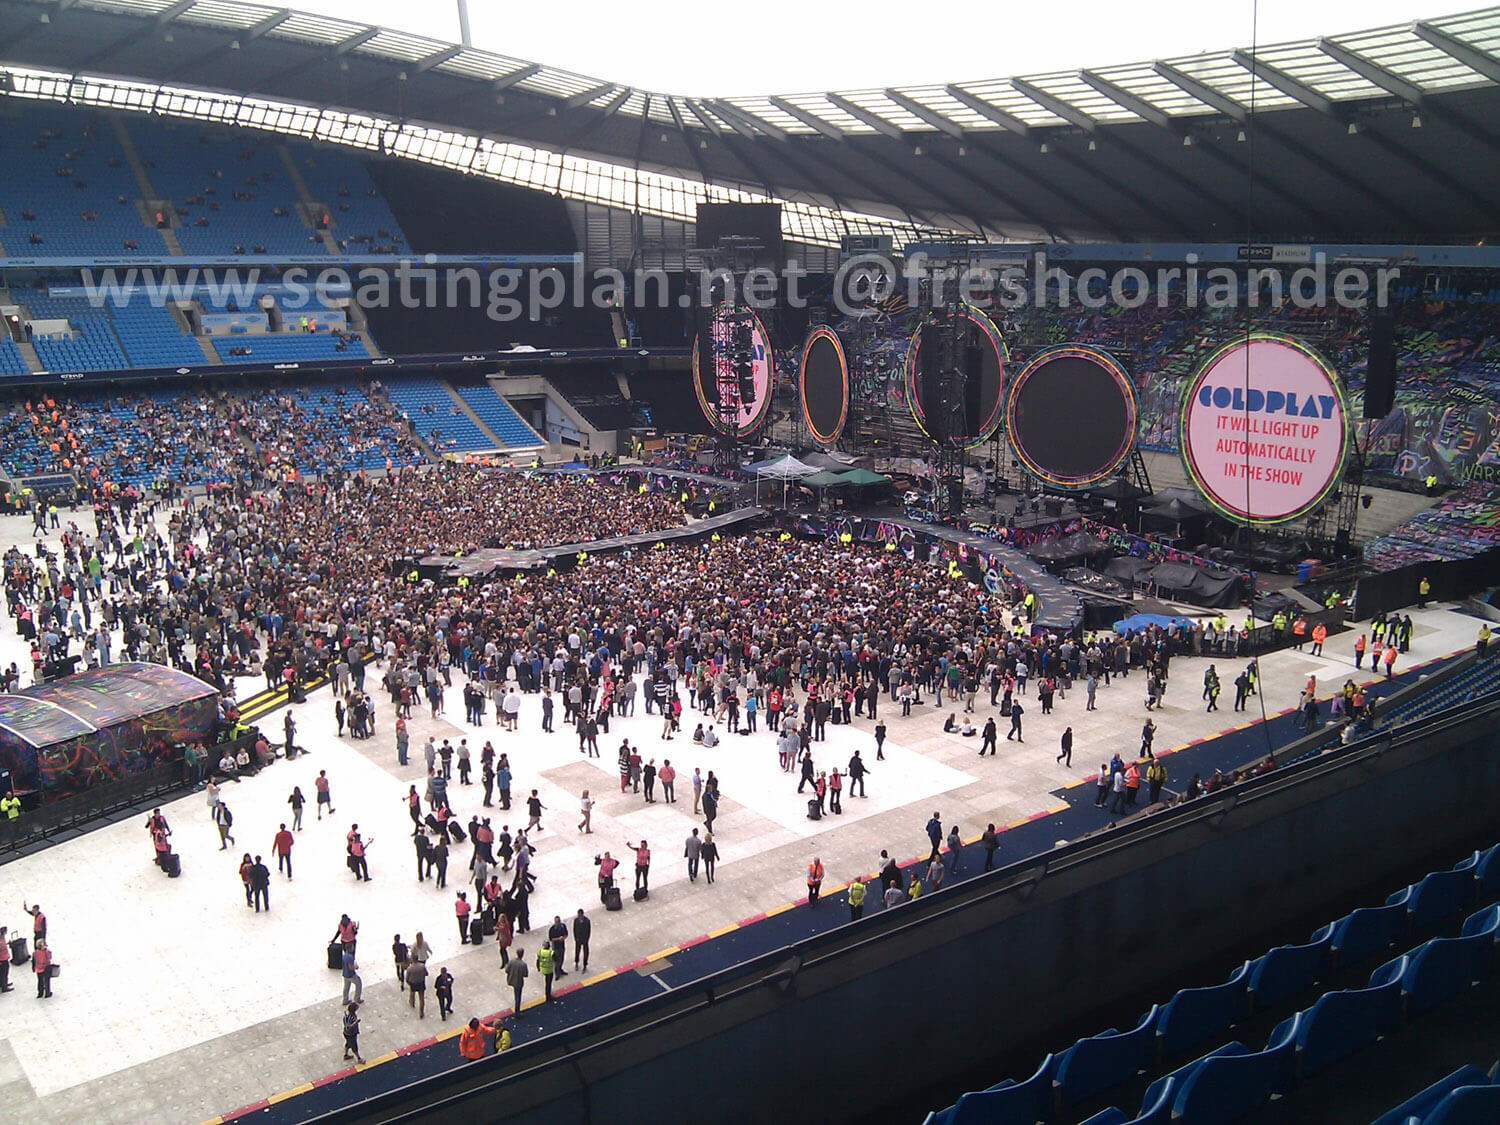 View of Coldplay at Etihad Stadium Manchester from Seat Block 207